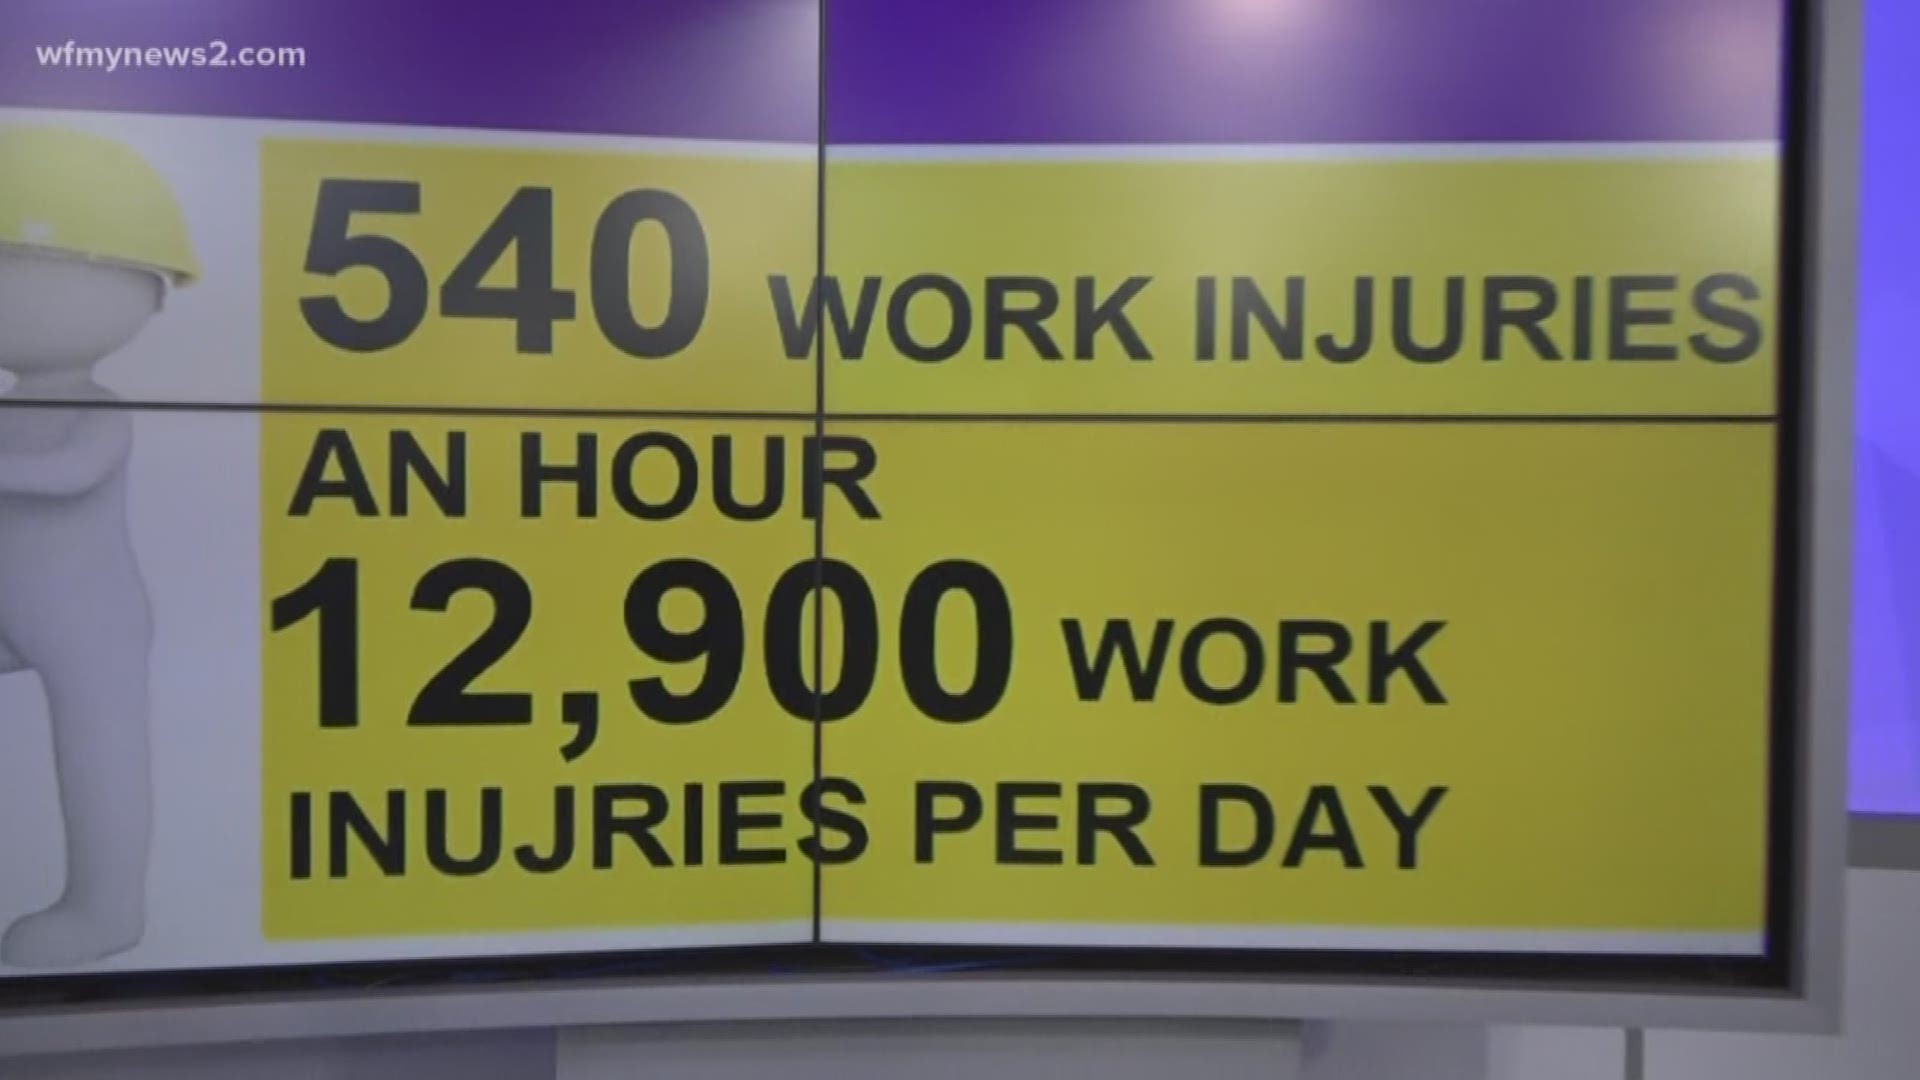 A worker is injured every 7 seconds according to the national safety council.